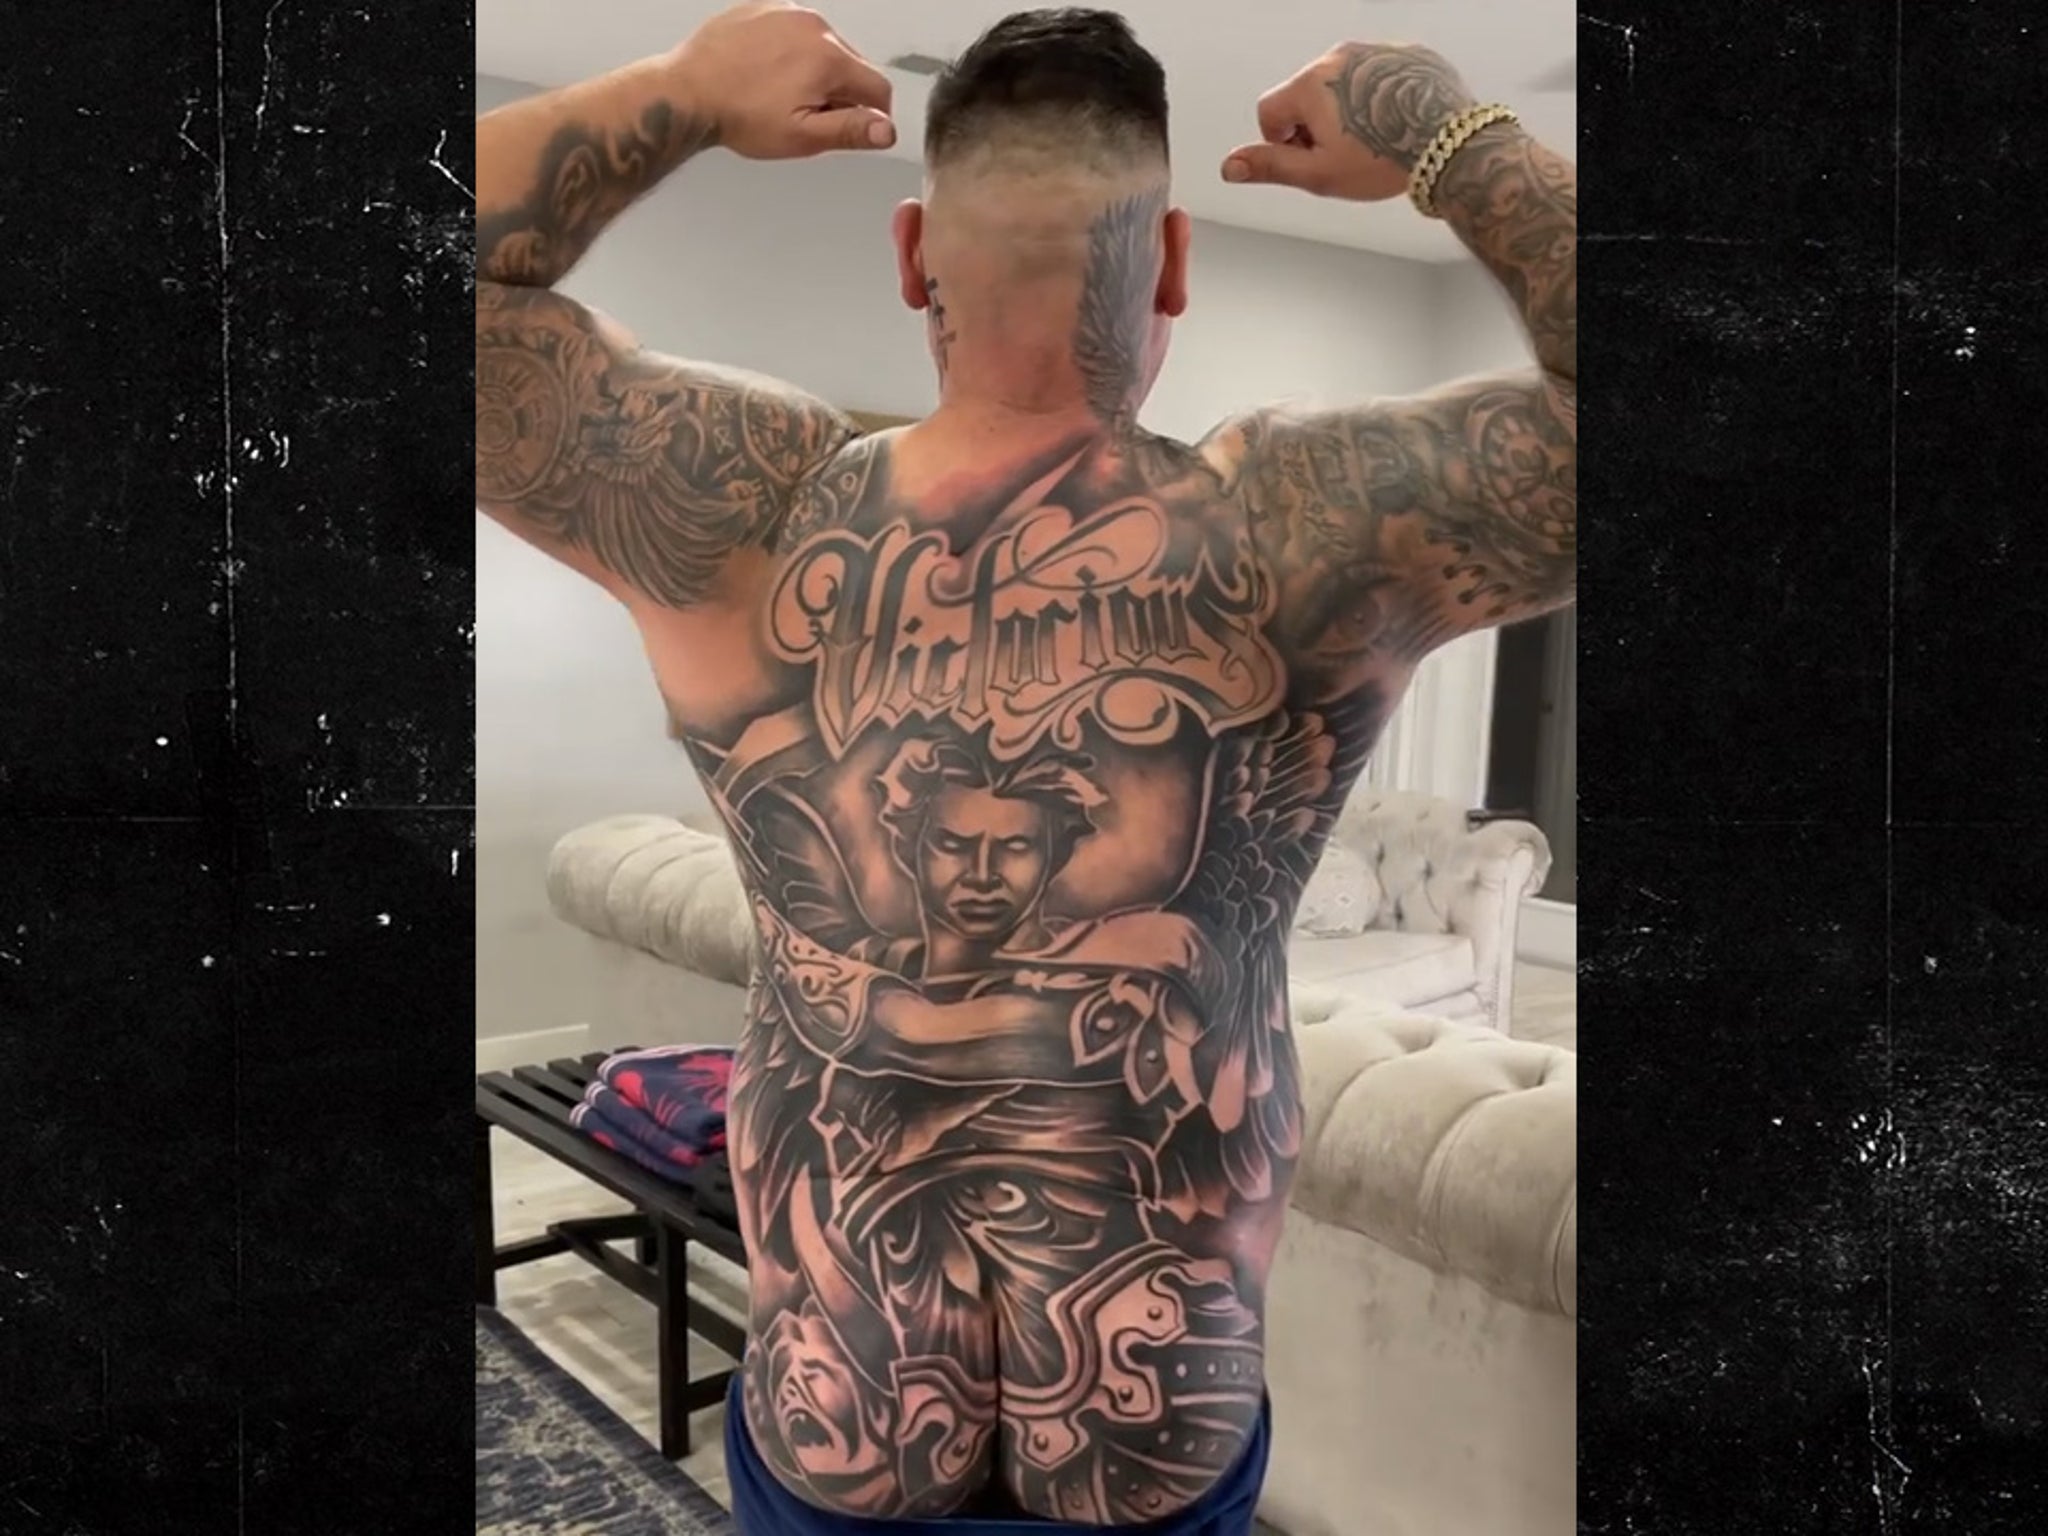 Boxing Star Andy Ruiz Gets Massive Backside Tattoo, Butt Cheeks Included!